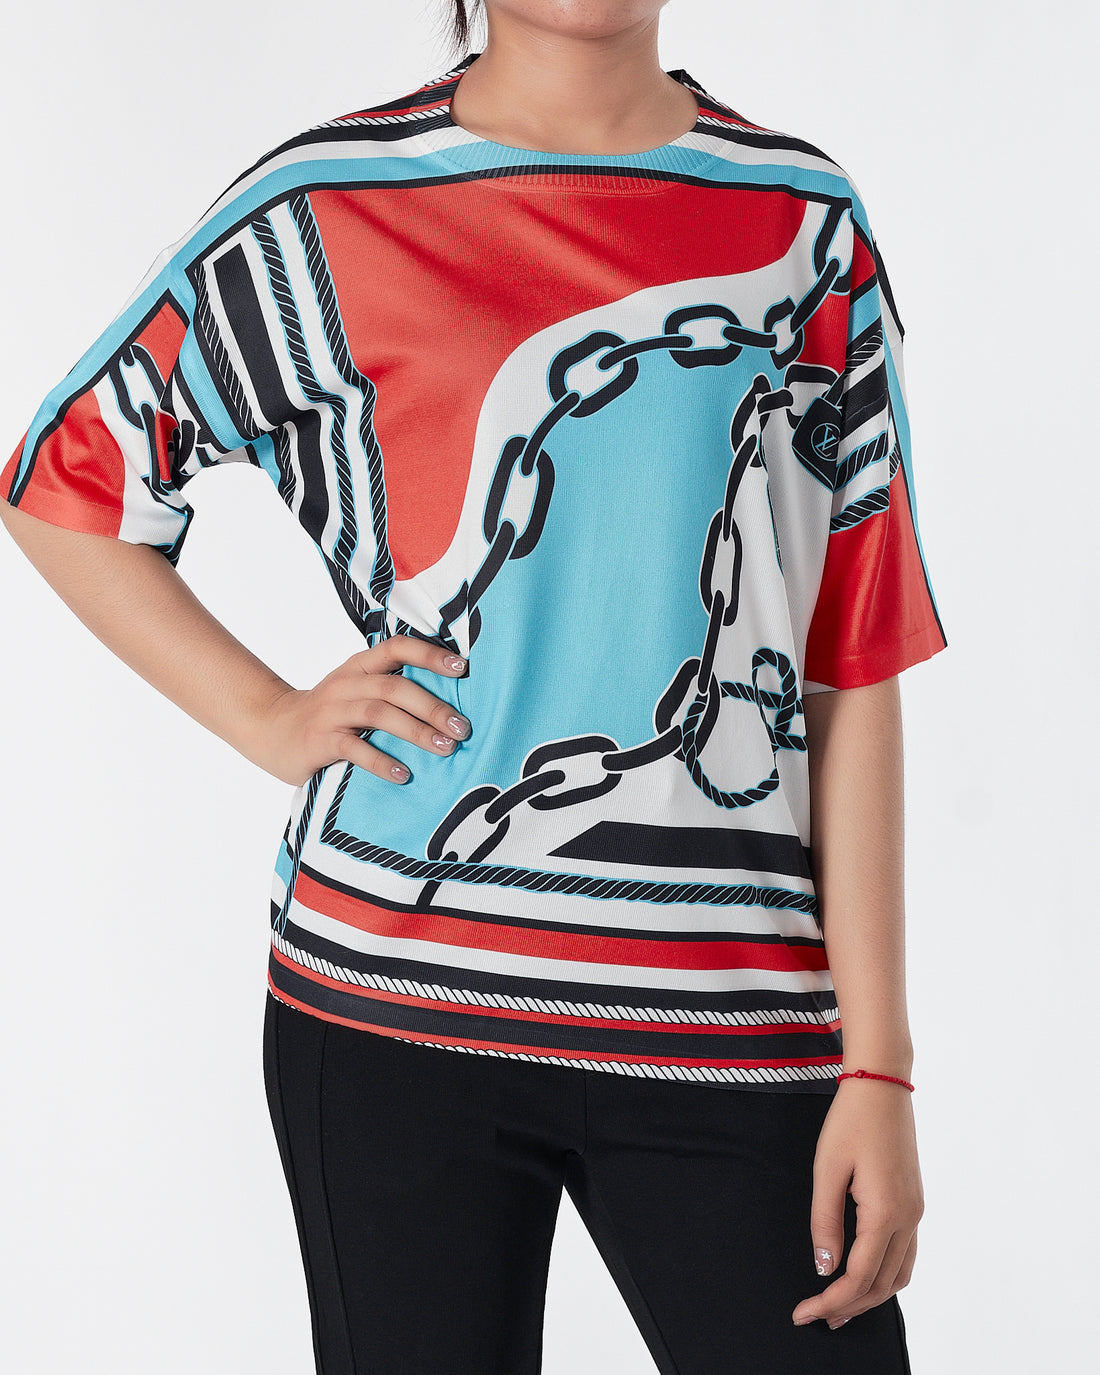 Chain Over Printed Lady Shirt 15.90